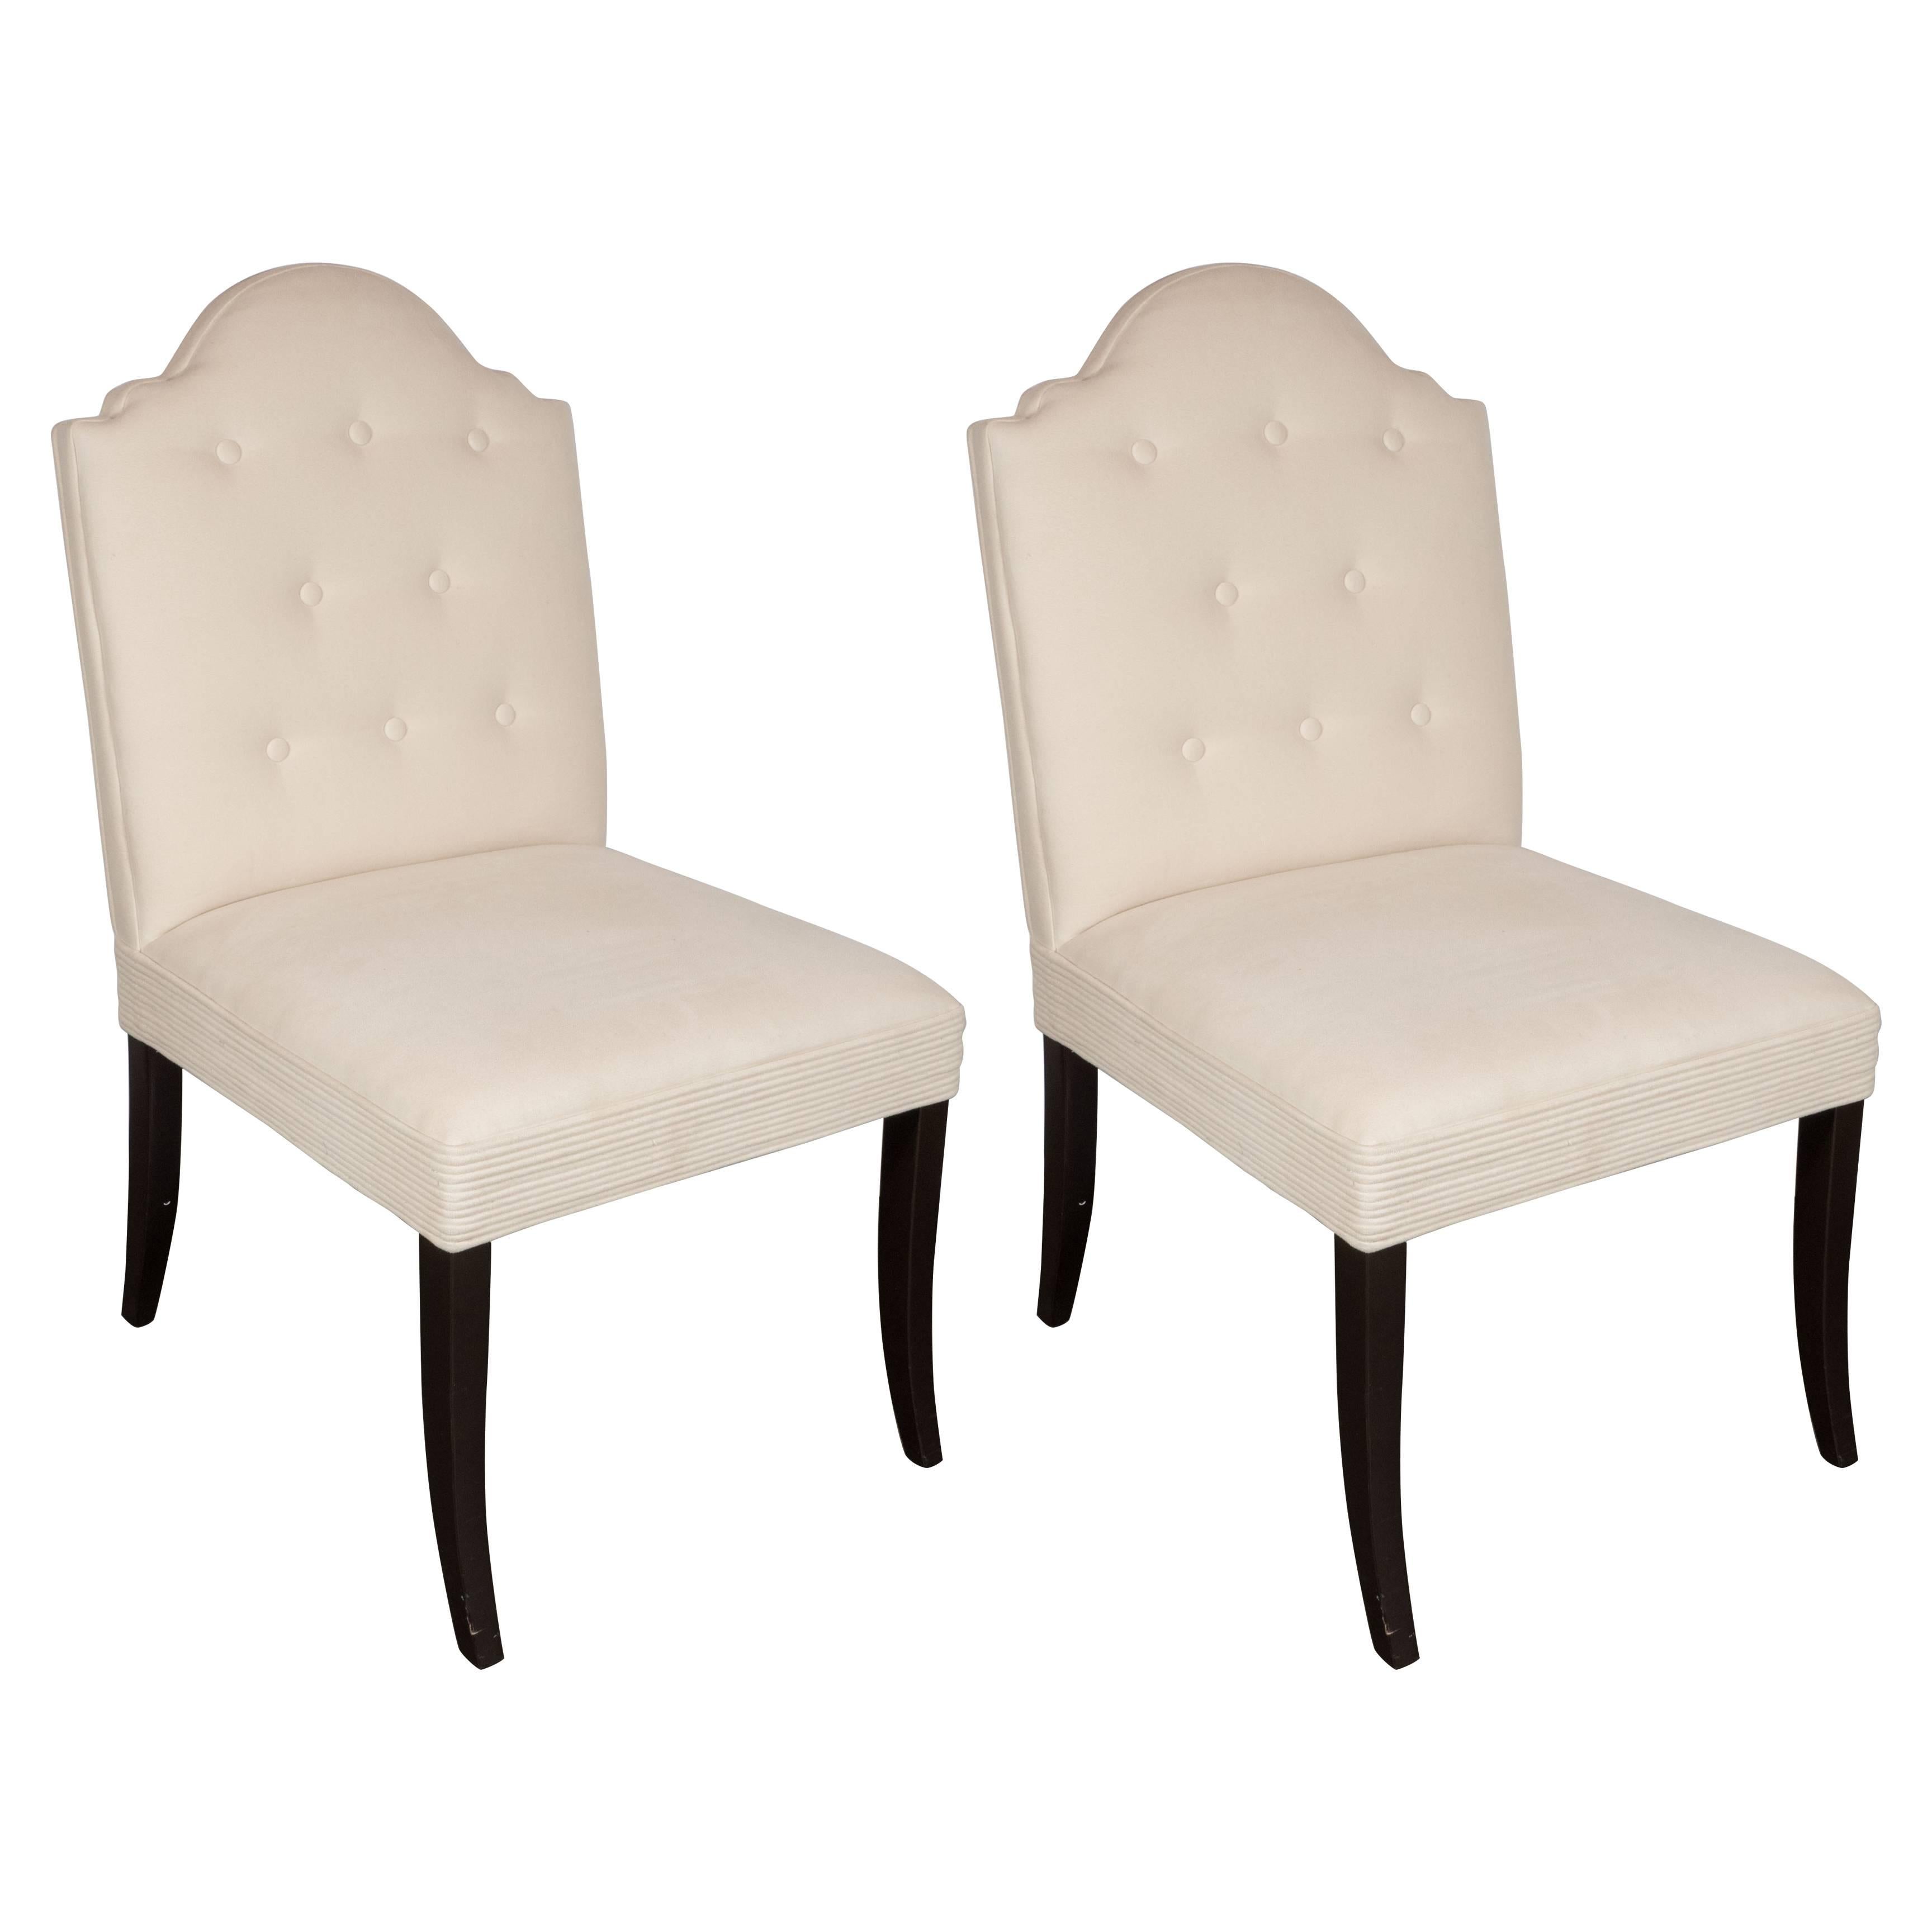 Luxe Pair of Elegant Scroll Back Chairs Upholstered in Loro Piana Cashmere